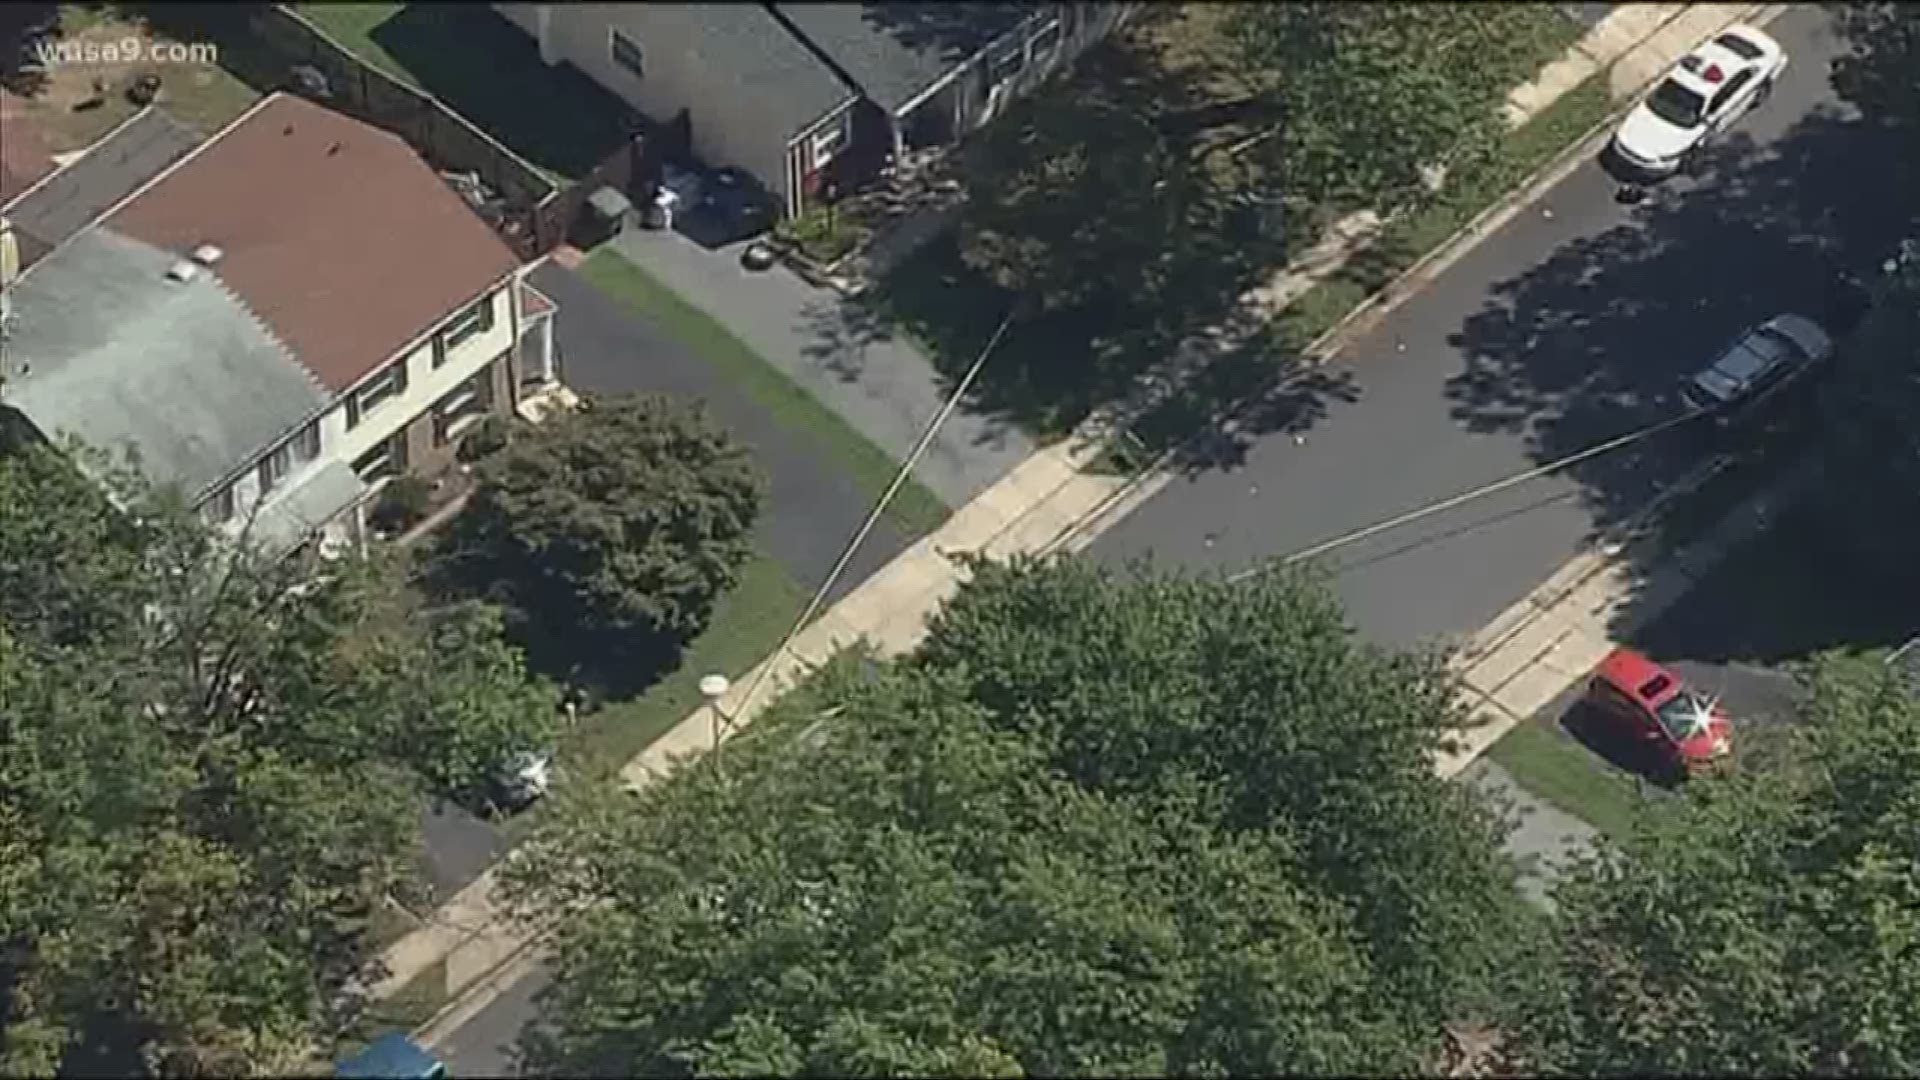 Some tense moments in Frederick, Maryland today during the first day of school. Sky 9 was over the scene on Heather Ridge Drive where there was a shooting. Two nearby schools were briefly placed under lockdown.